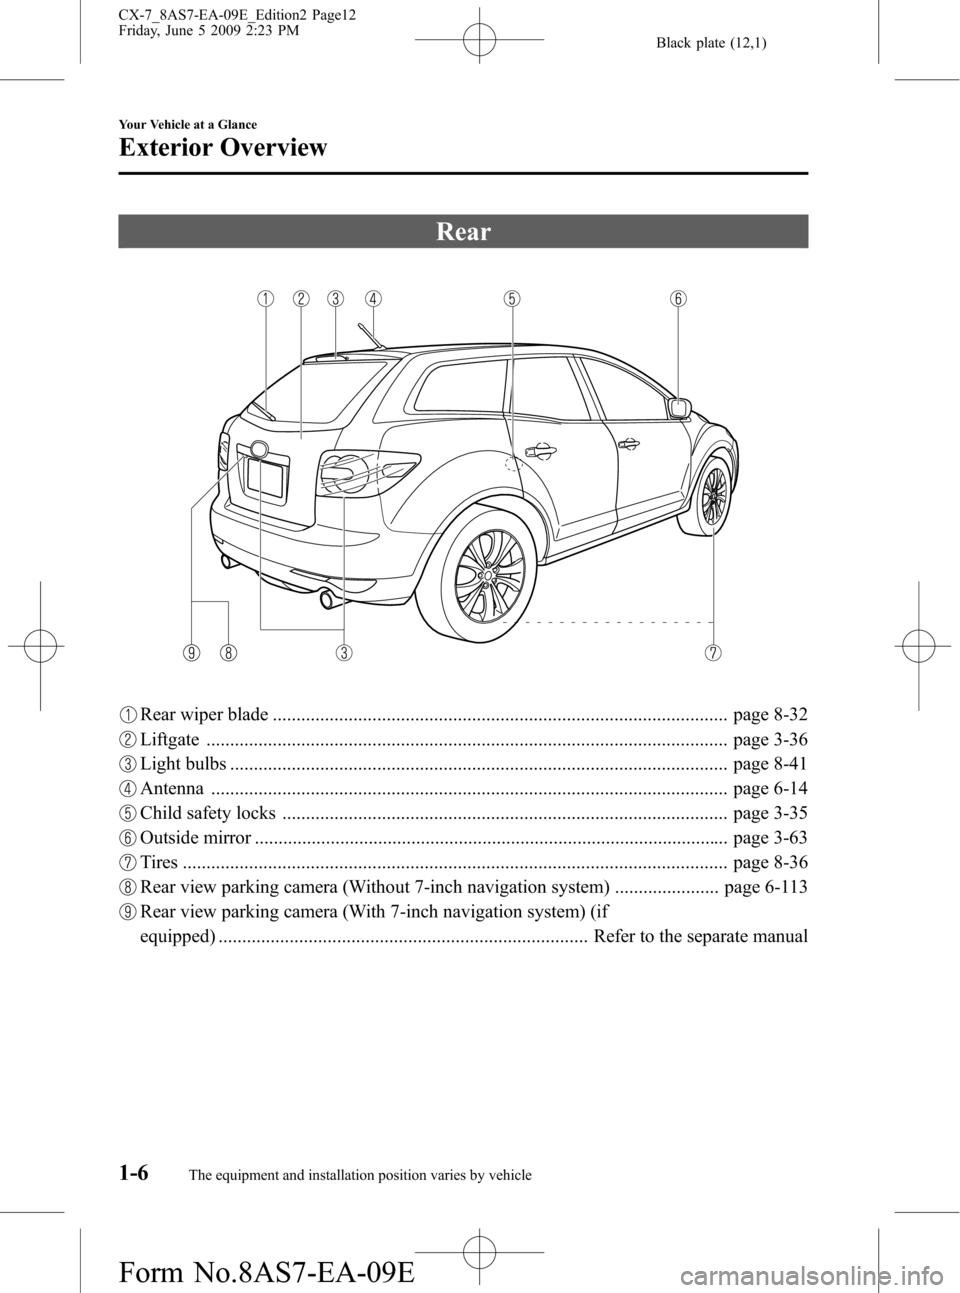 MAZDA MODEL CX-7 2010  Owners Manual (in English) Black plate (12,1)
Rear
Rear wiper blade ................................................................................................ page 8-32
Liftgate ...........................................